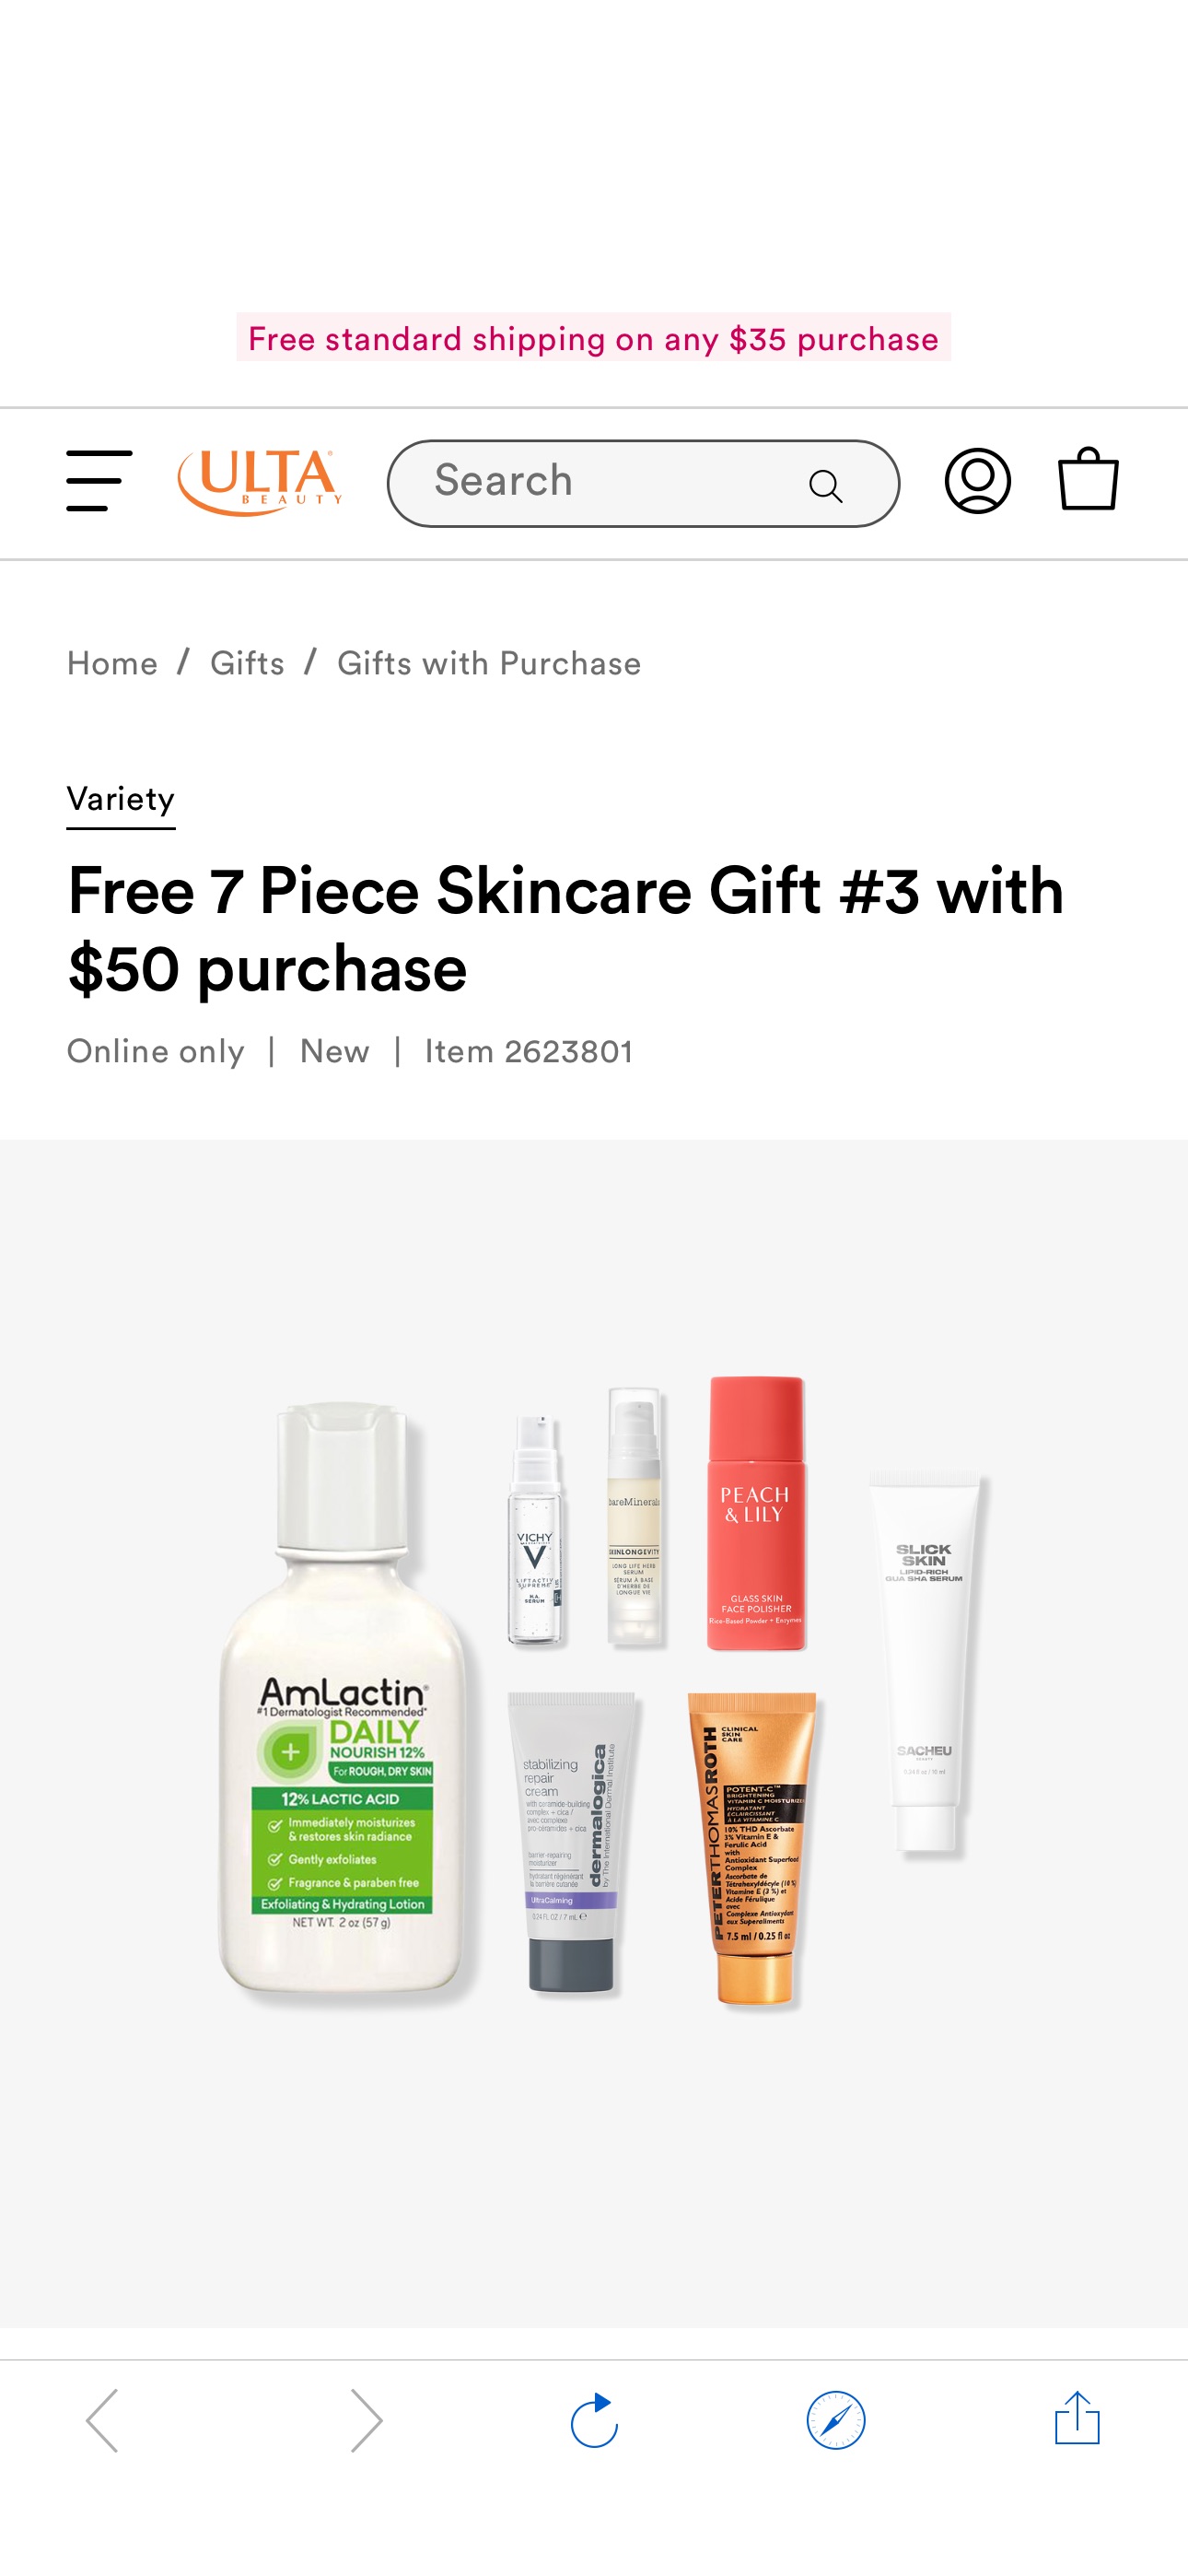 Free 7 Piece Skincare Gift #3 with $50 purchase - Variety | Ulta Beauty